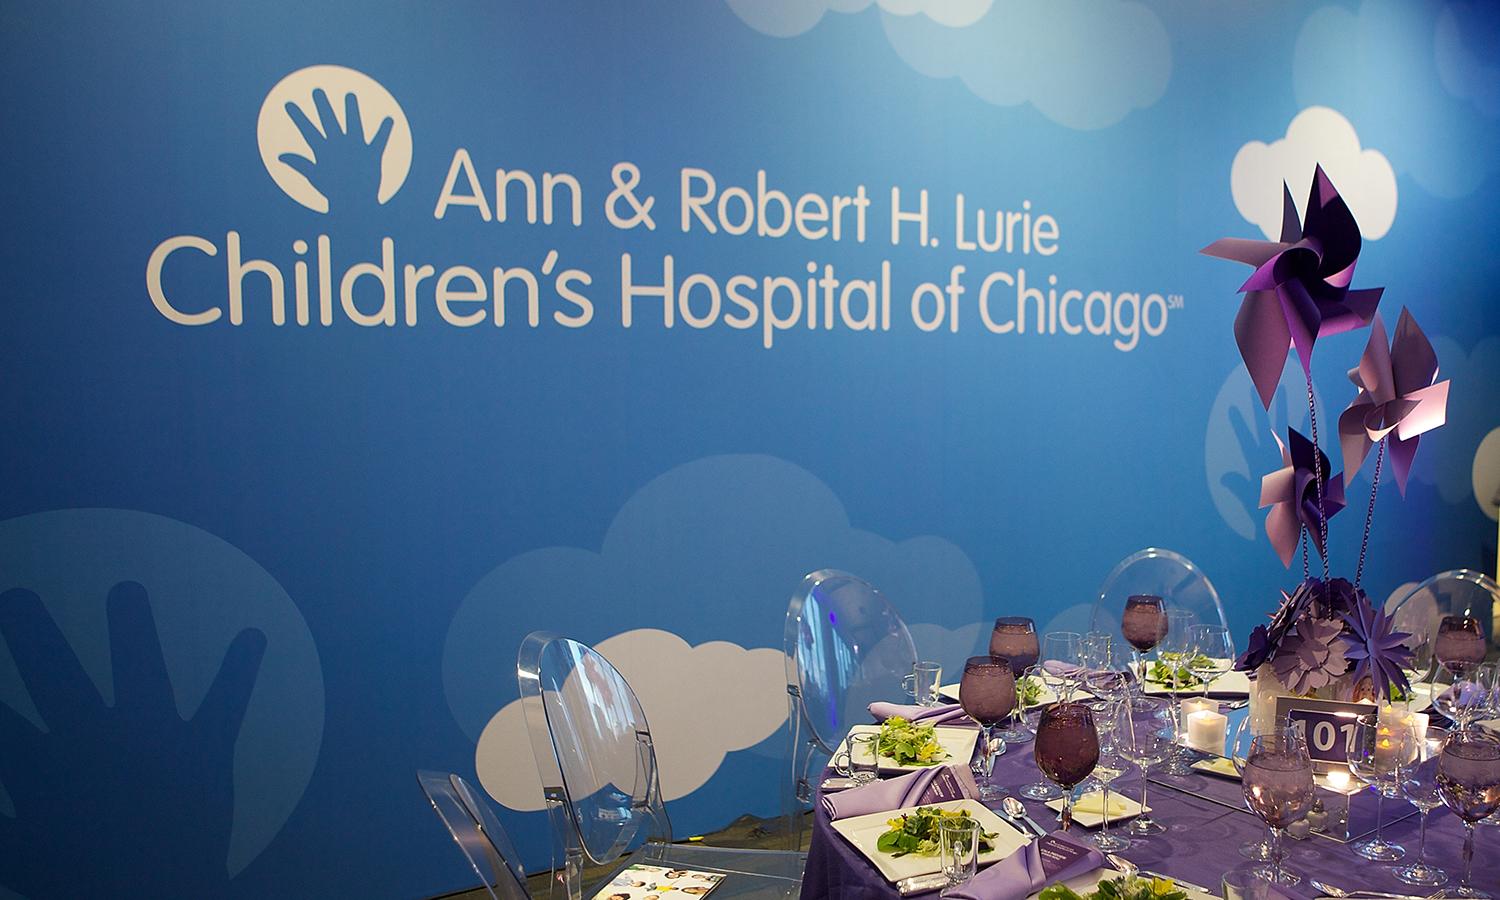 A general view of a gala benefit for Ann &#038; Robert H. Lurie Children&#8217;s Hospital of Chicago on April 20, 2012. (Photo by Jeff Schear/Getty Images for Ann and Robert H. Lurie Hospital of Chicago)